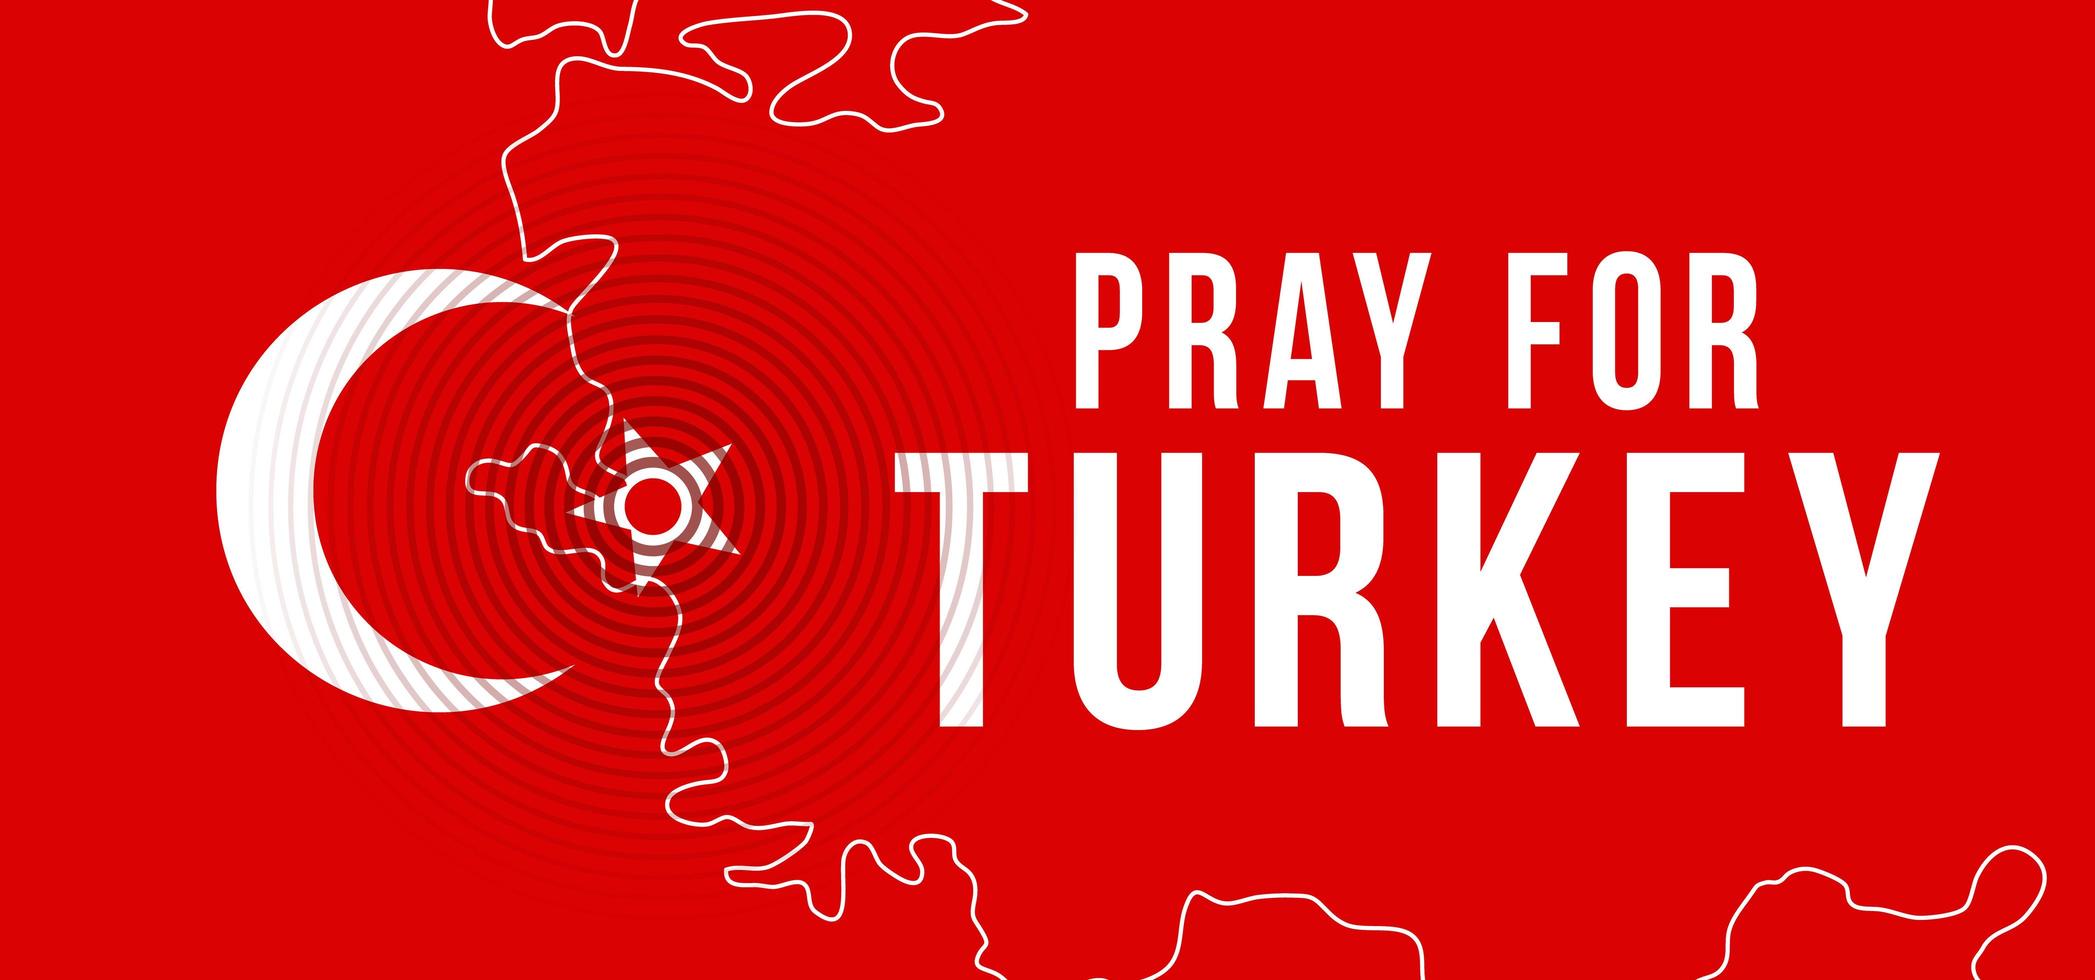 The epicenter of the earthquake in Turkey. Pray for Turkey. Vector illustration map with the text asking prays due to a strong earthquake near Izmir on October 30